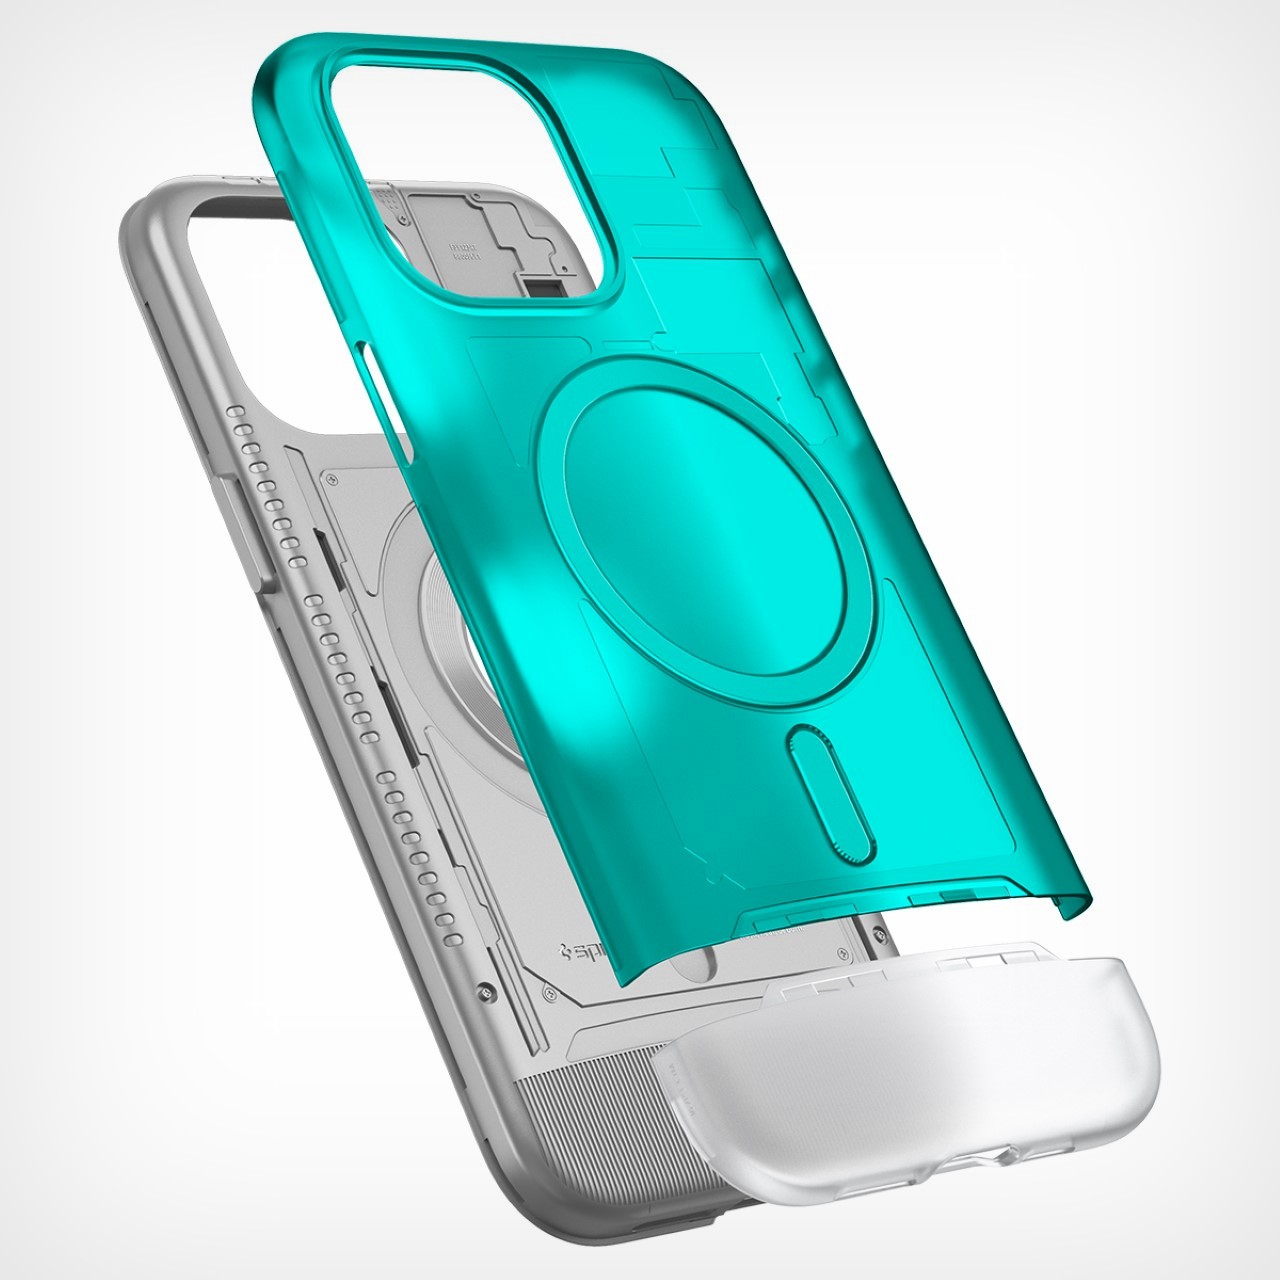 The iPhone 15 Pro Gets a Retro Throwback with Spigen's iMac G3